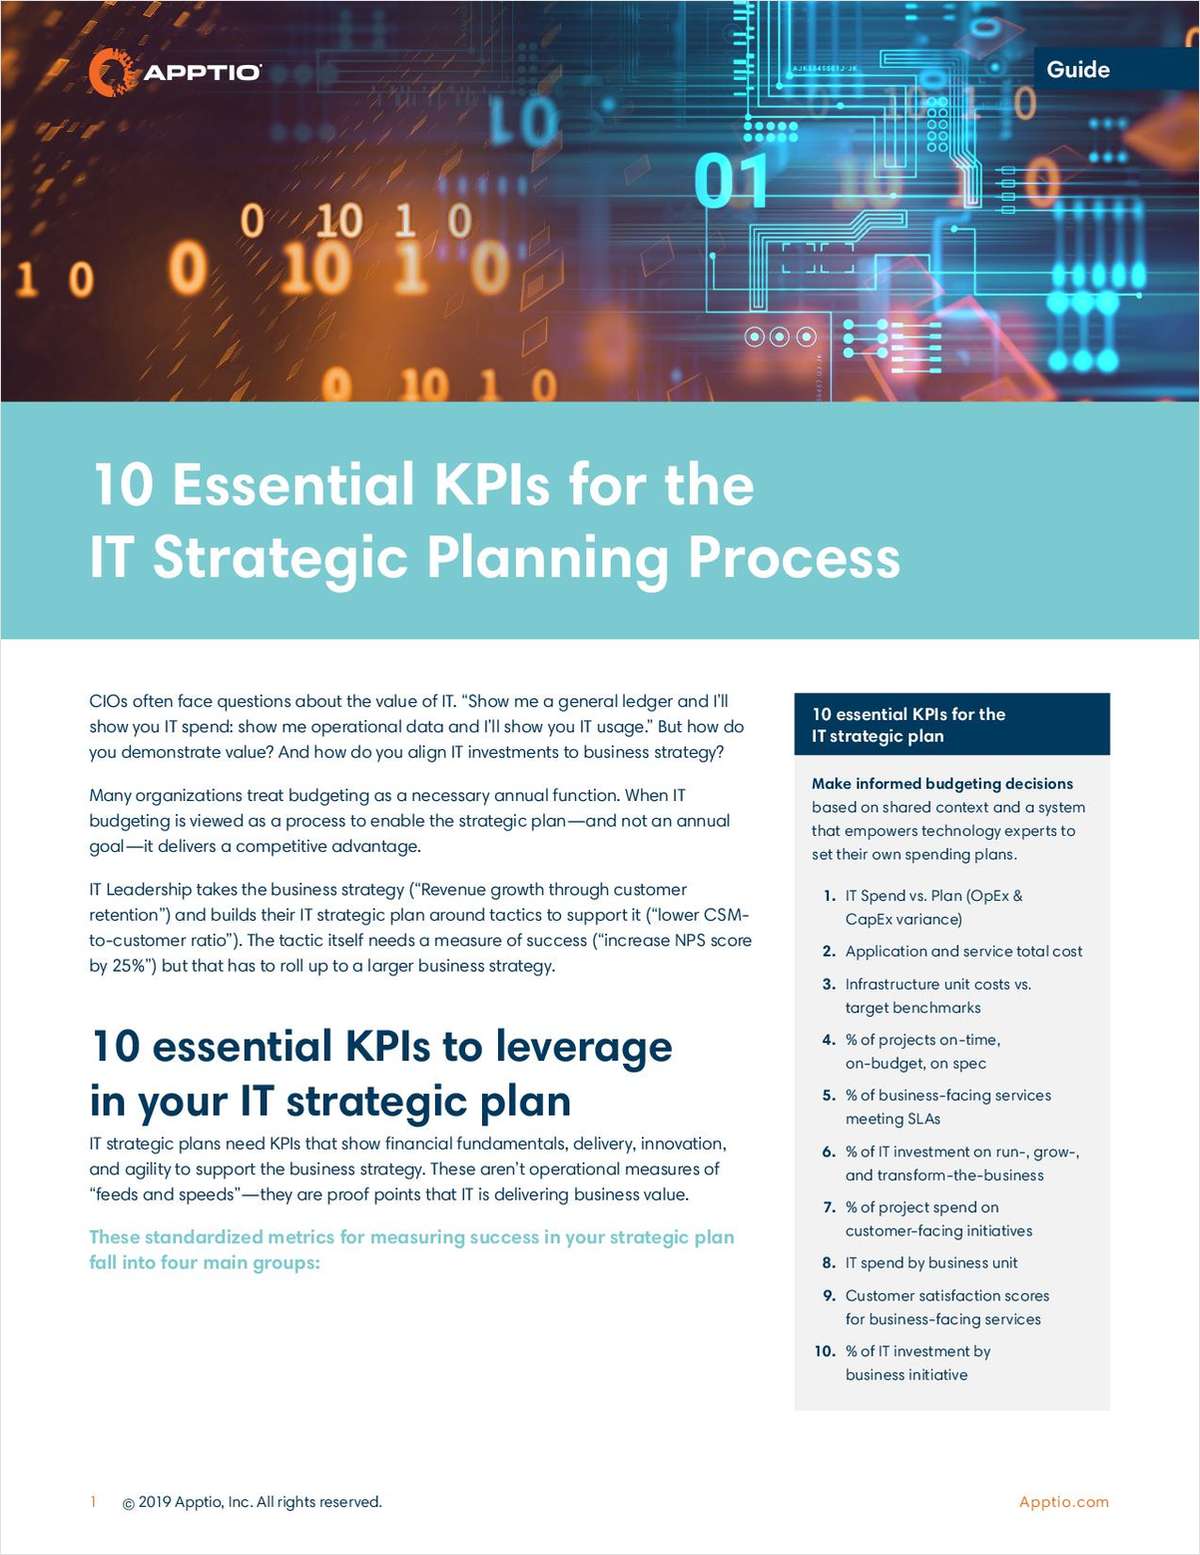 10 Essential KPIs for the IT Strategic Planning Process